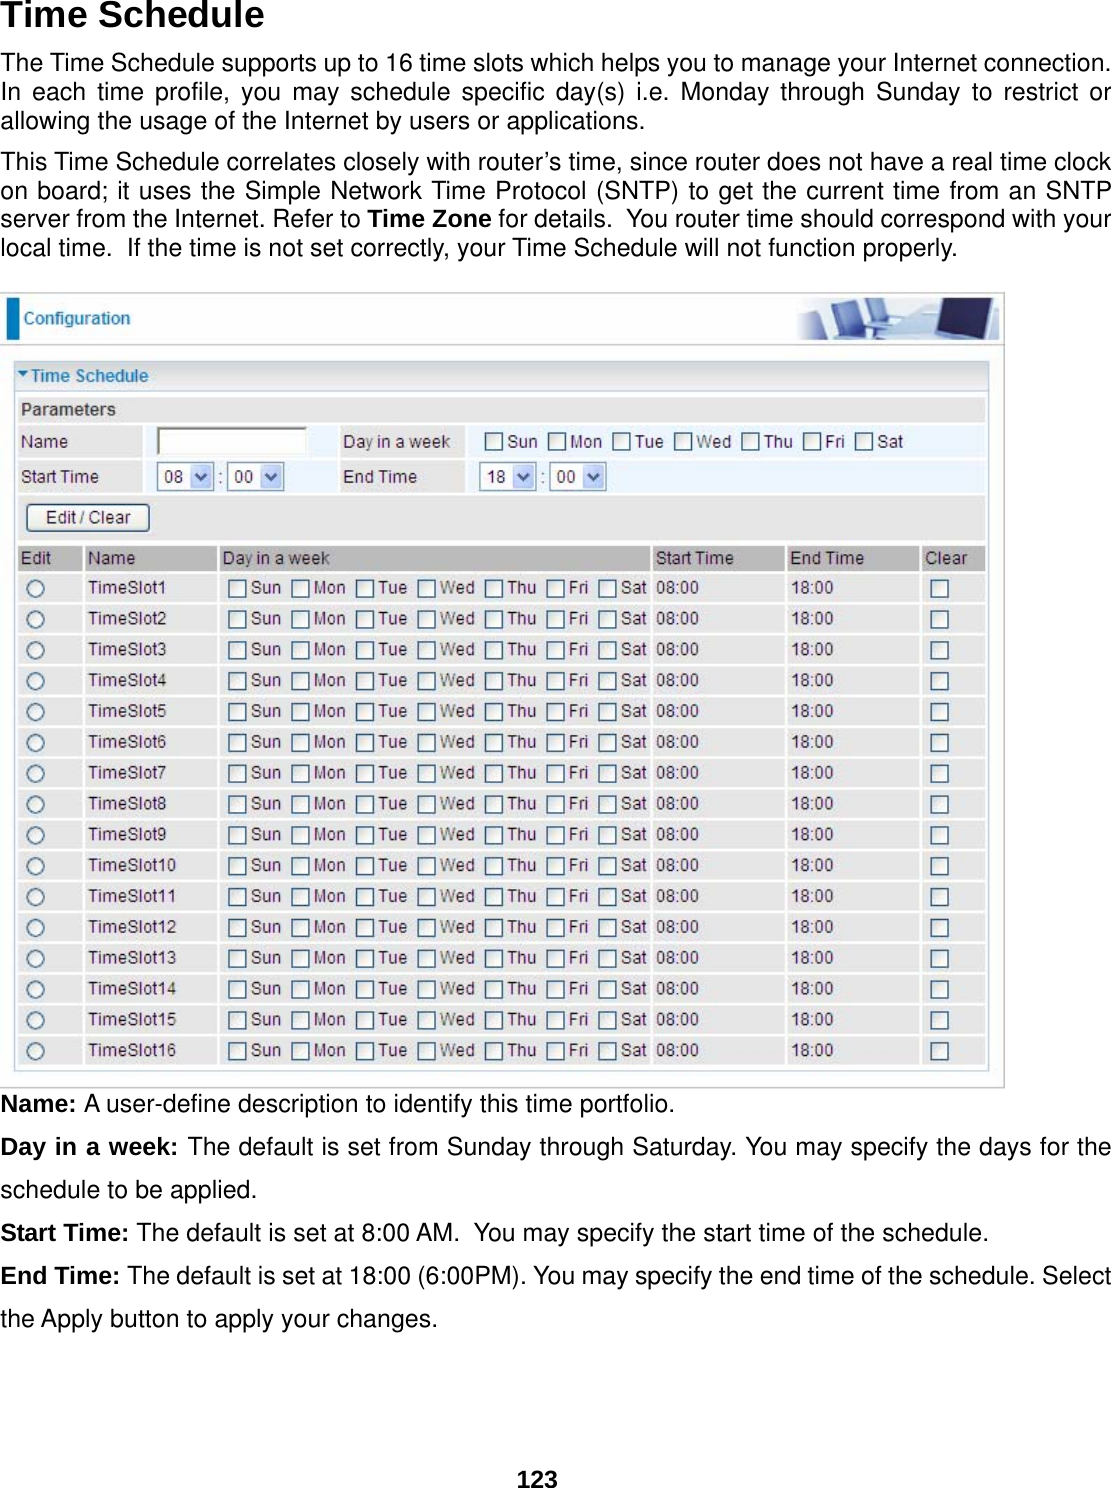  123 Time Schedule The Time Schedule supports up to 16 time slots which helps you to manage your Internet connection.  In each time profile, you may schedule specific day(s) i.e. Monday through Sunday to restrict or allowing the usage of the Internet by users or applications.   This Time Schedule correlates closely with router’s time, since router does not have a real time clock on board; it uses the Simple Network Time Protocol (SNTP) to get the current time from an SNTP server from the Internet. Refer to Time Zone for details.  You router time should correspond with your local time.  If the time is not set correctly, your Time Schedule will not function properly.   Name: A user-define description to identify this time portfolio. Day in a week: The default is set from Sunday through Saturday. You may specify the days for the schedule to be applied. Start Time: The default is set at 8:00 AM.  You may specify the start time of the schedule. End Time: The default is set at 18:00 (6:00PM). You may specify the end time of the schedule. Select the Apply button to apply your changes. 